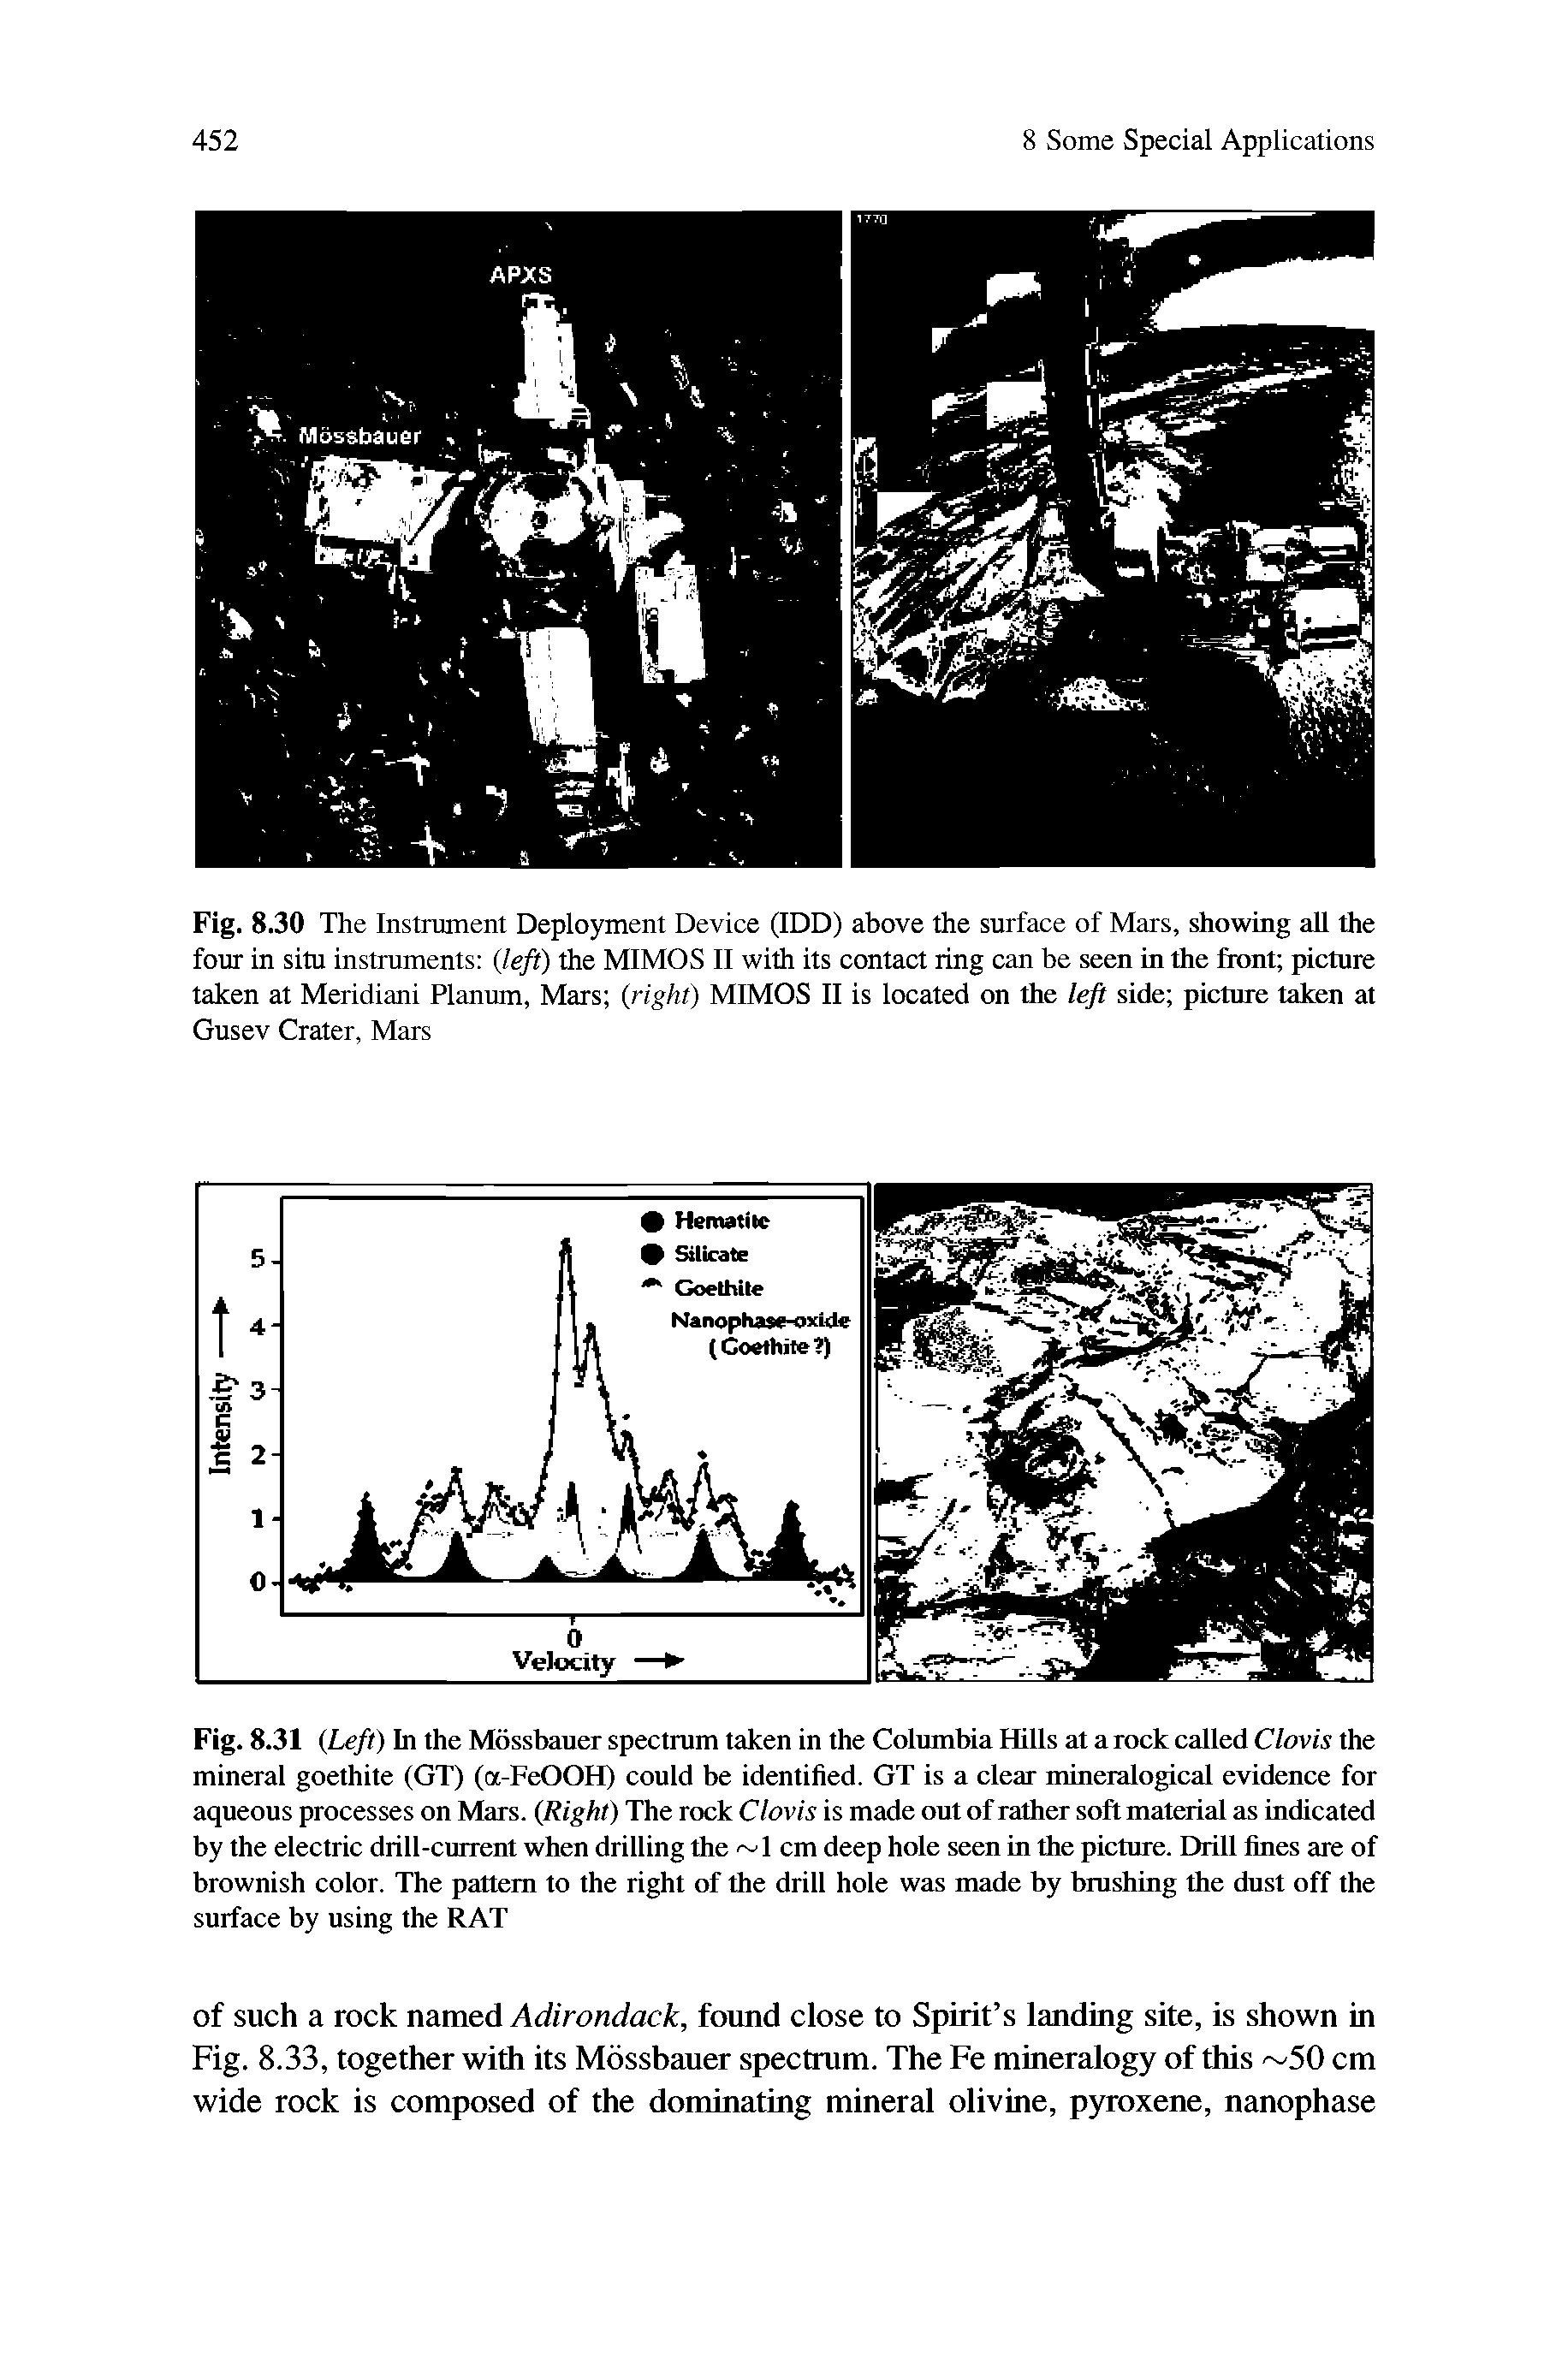 Fig. 8.31 Left) In the Mossbauer spectrum taken in the Columbia Hills at a rock called Clovis the mineral goethite (GT) (a-FeOOH) could be identified. GT is a clear mineralogical evidence for aqueous processes on Mars. Right) The rock Clovis is made out of rather soft material as indicated by the electric drill-current when drilling the - - I cm deep hole seen in the picture. Drill fines are of brownish color. The pattern to the right of the drill hole was made by bmshing the dust off the surface by using the RAT...